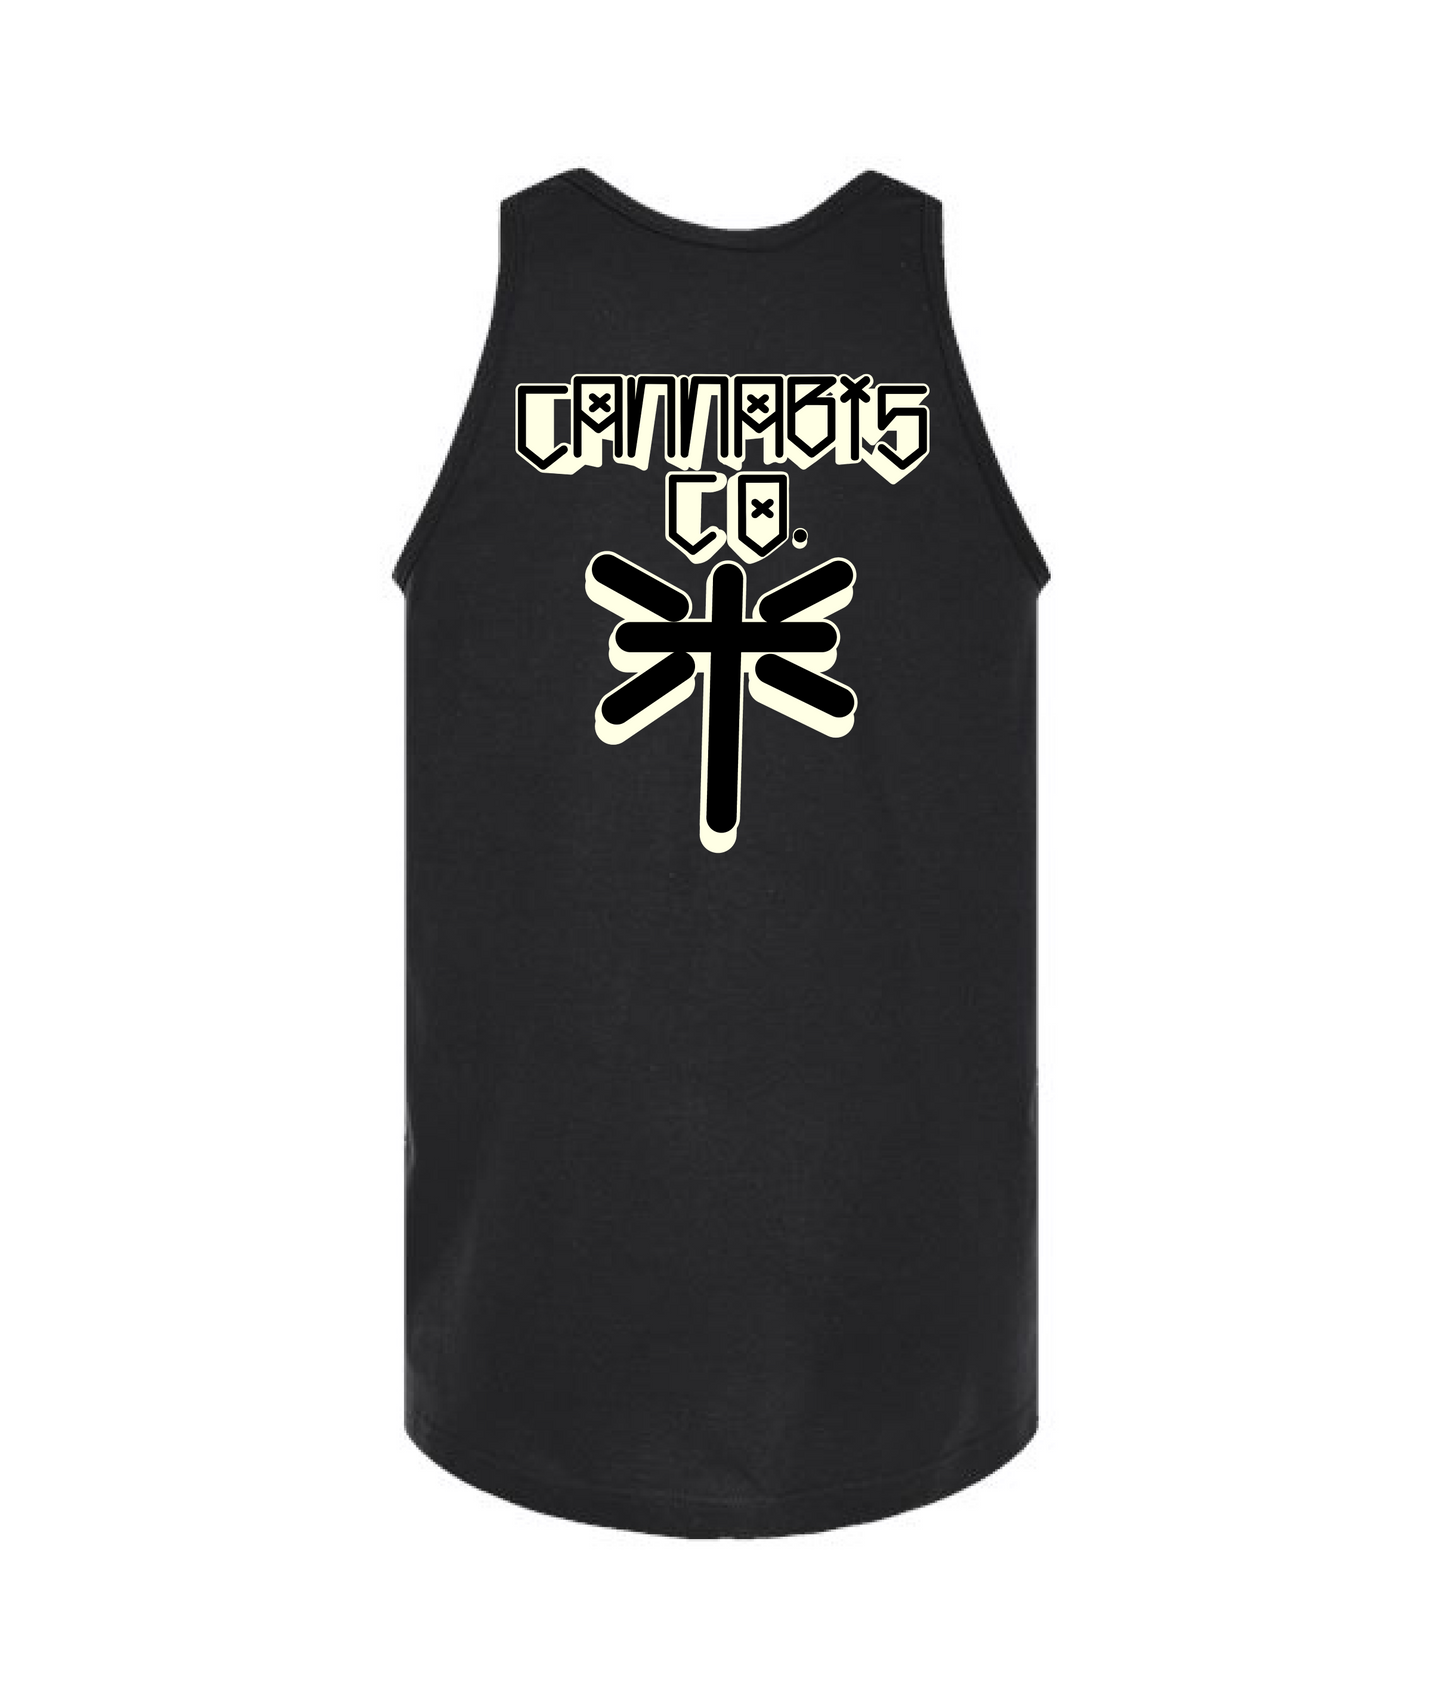 Valley Creamery Cannabis Co. - Fire In Fire Out Capsule - Black Tank Top